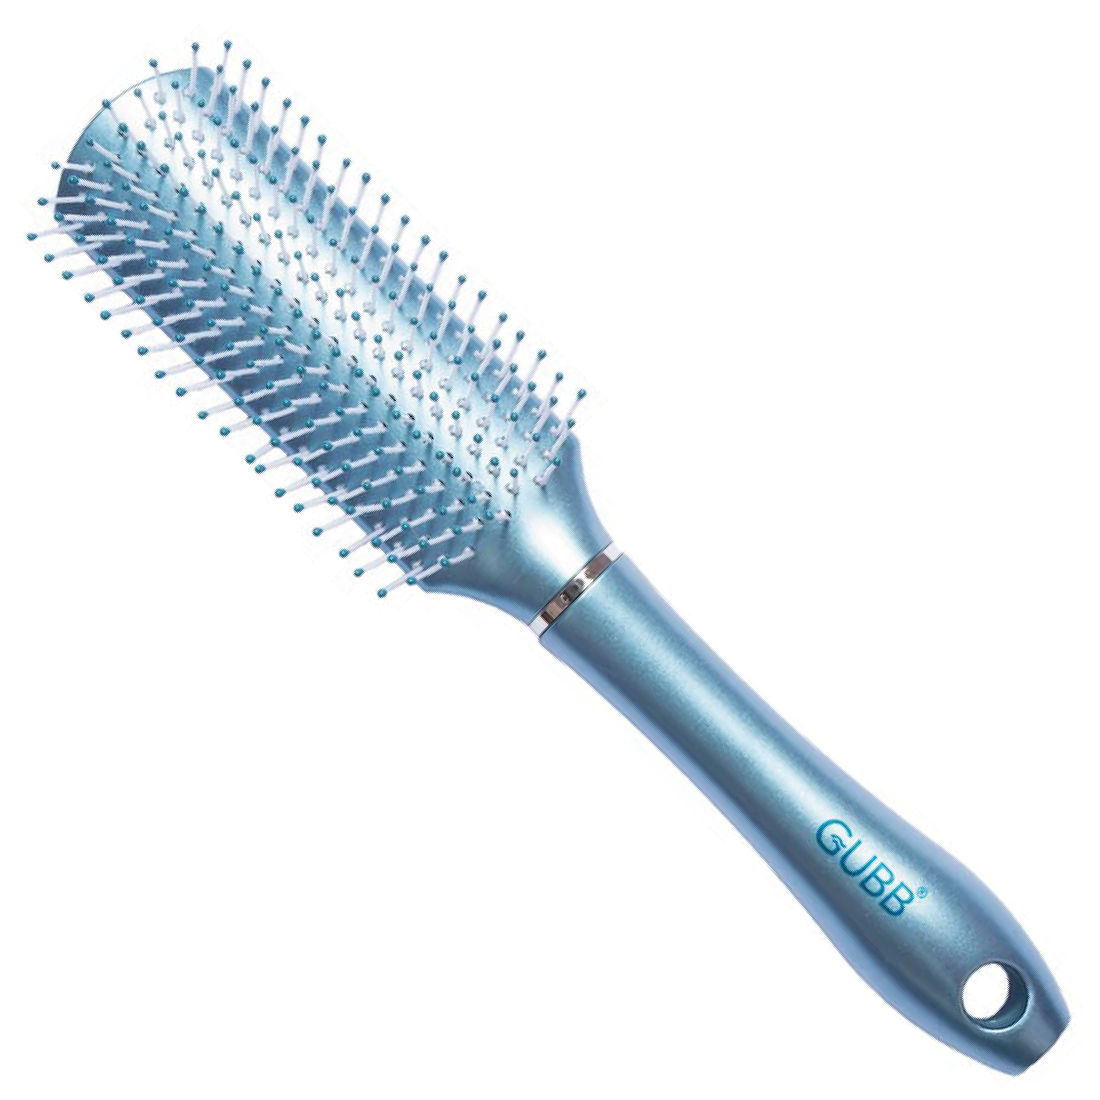 GUBB Styling Hair Brush For Men & Women - Style Your Hairs With Perfection:Styler Range